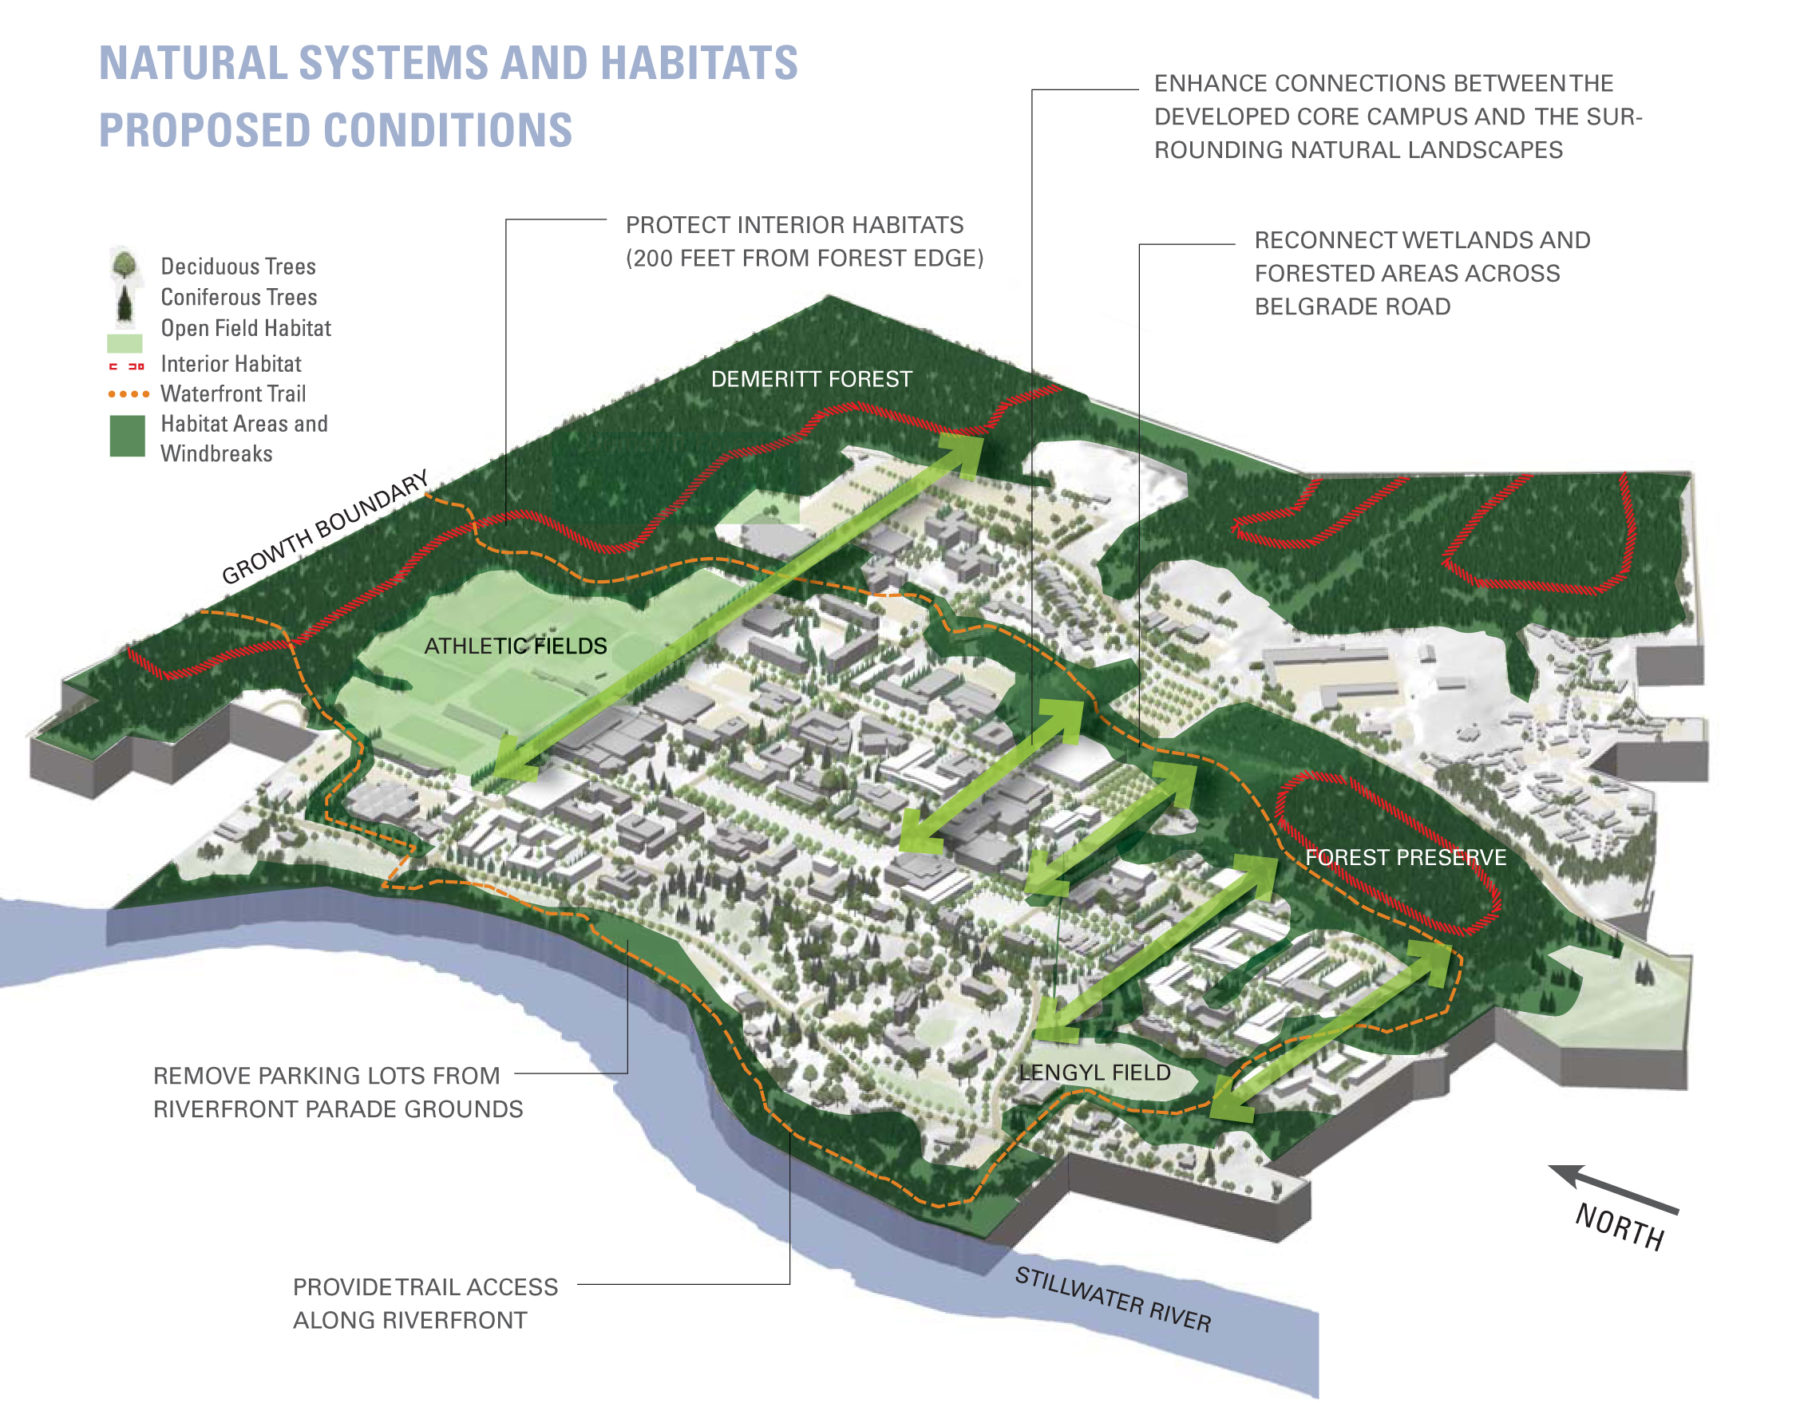 Map showing natural systems and habitats at UMaine